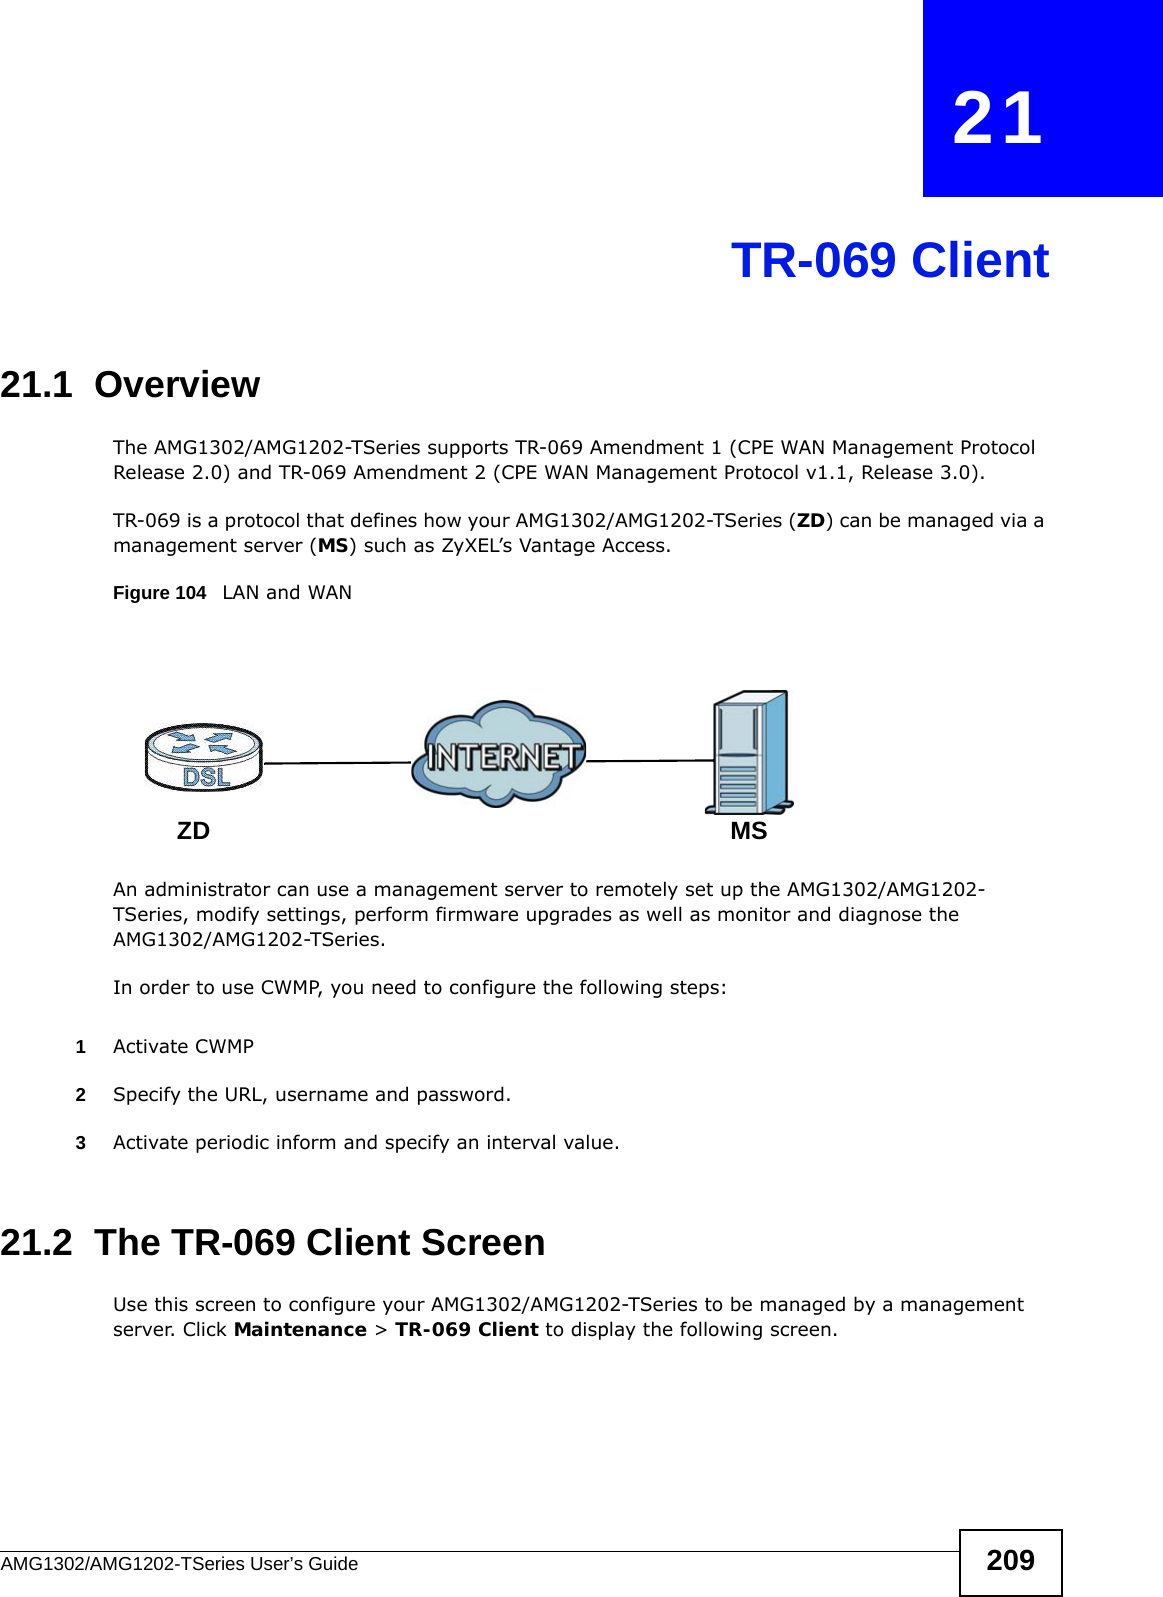 AMG1302/AMG1202-TSeries User’s Guide 209CHAPTER   21TR-069 Client21.1  OverviewThe AMG1302/AMG1202-TSeries supports TR-069 Amendment 1 (CPE WAN Management Protocol Release 2.0) and TR-069 Amendment 2 (CPE WAN Management Protocol v1.1, Release 3.0).TR-069 is a protocol that defines how your AMG1302/AMG1202-TSeries (ZD) can be managed via a management server (MS) such as ZyXEL’s Vantage Access. Figure 104   LAN and WANAn administrator can use a management server to remotely set up the AMG1302/AMG1202-TSeries, modify settings, perform firmware upgrades as well as monitor and diagnose the AMG1302/AMG1202-TSeries. In order to use CWMP, you need to configure the following steps:1Activate CWMP2Specify the URL, username and password.3Activate periodic inform and specify an interval value.21.2  The TR-069 Client ScreenUse this screen to configure your AMG1302/AMG1202-TSeries to be managed by a management server. Click Maintenance &gt; TR-069 Client to display the following screen.MSZD